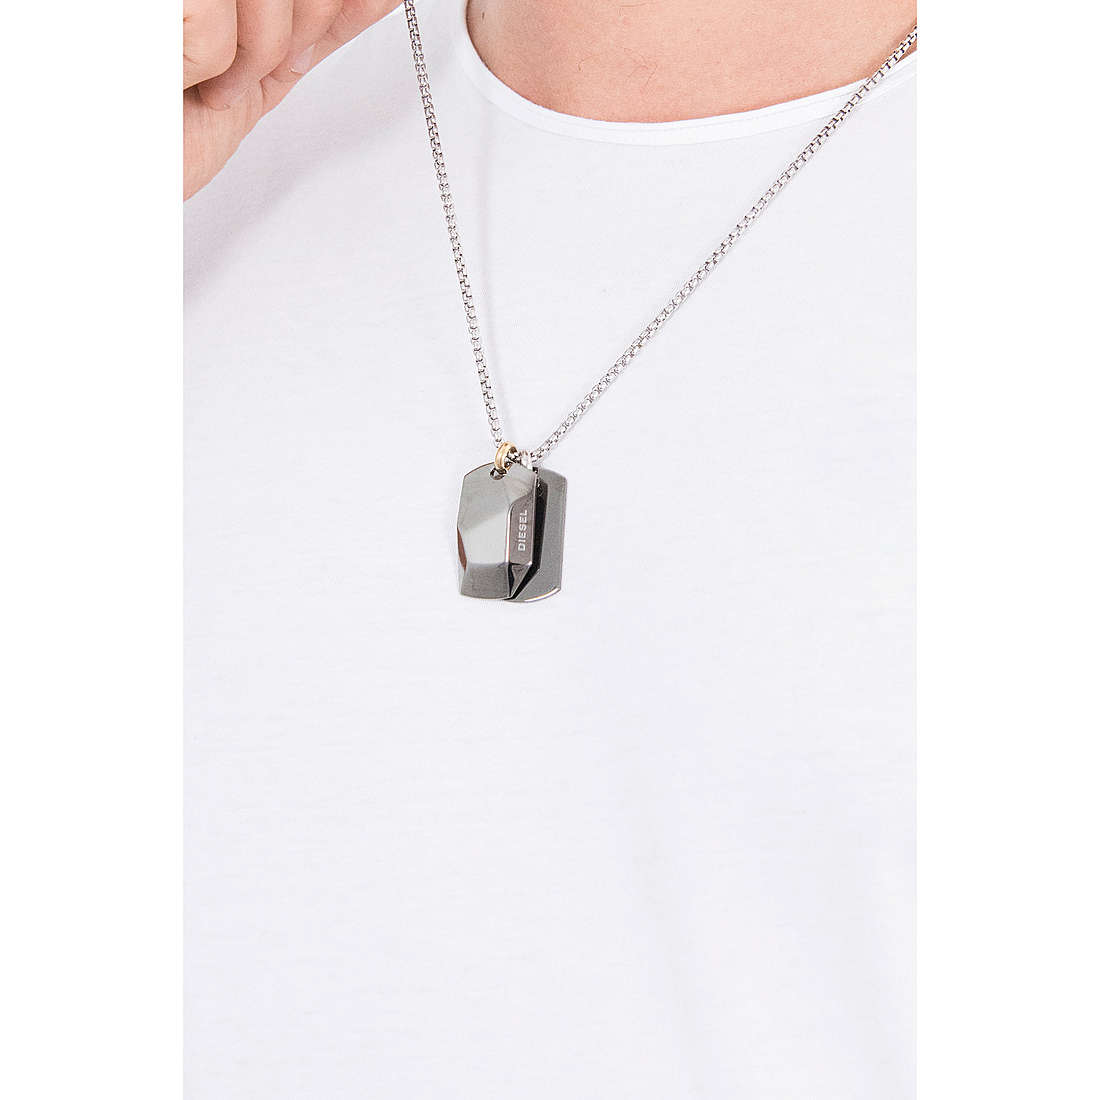 Diesel collane Double Dogtags uomo DX1143040 indosso